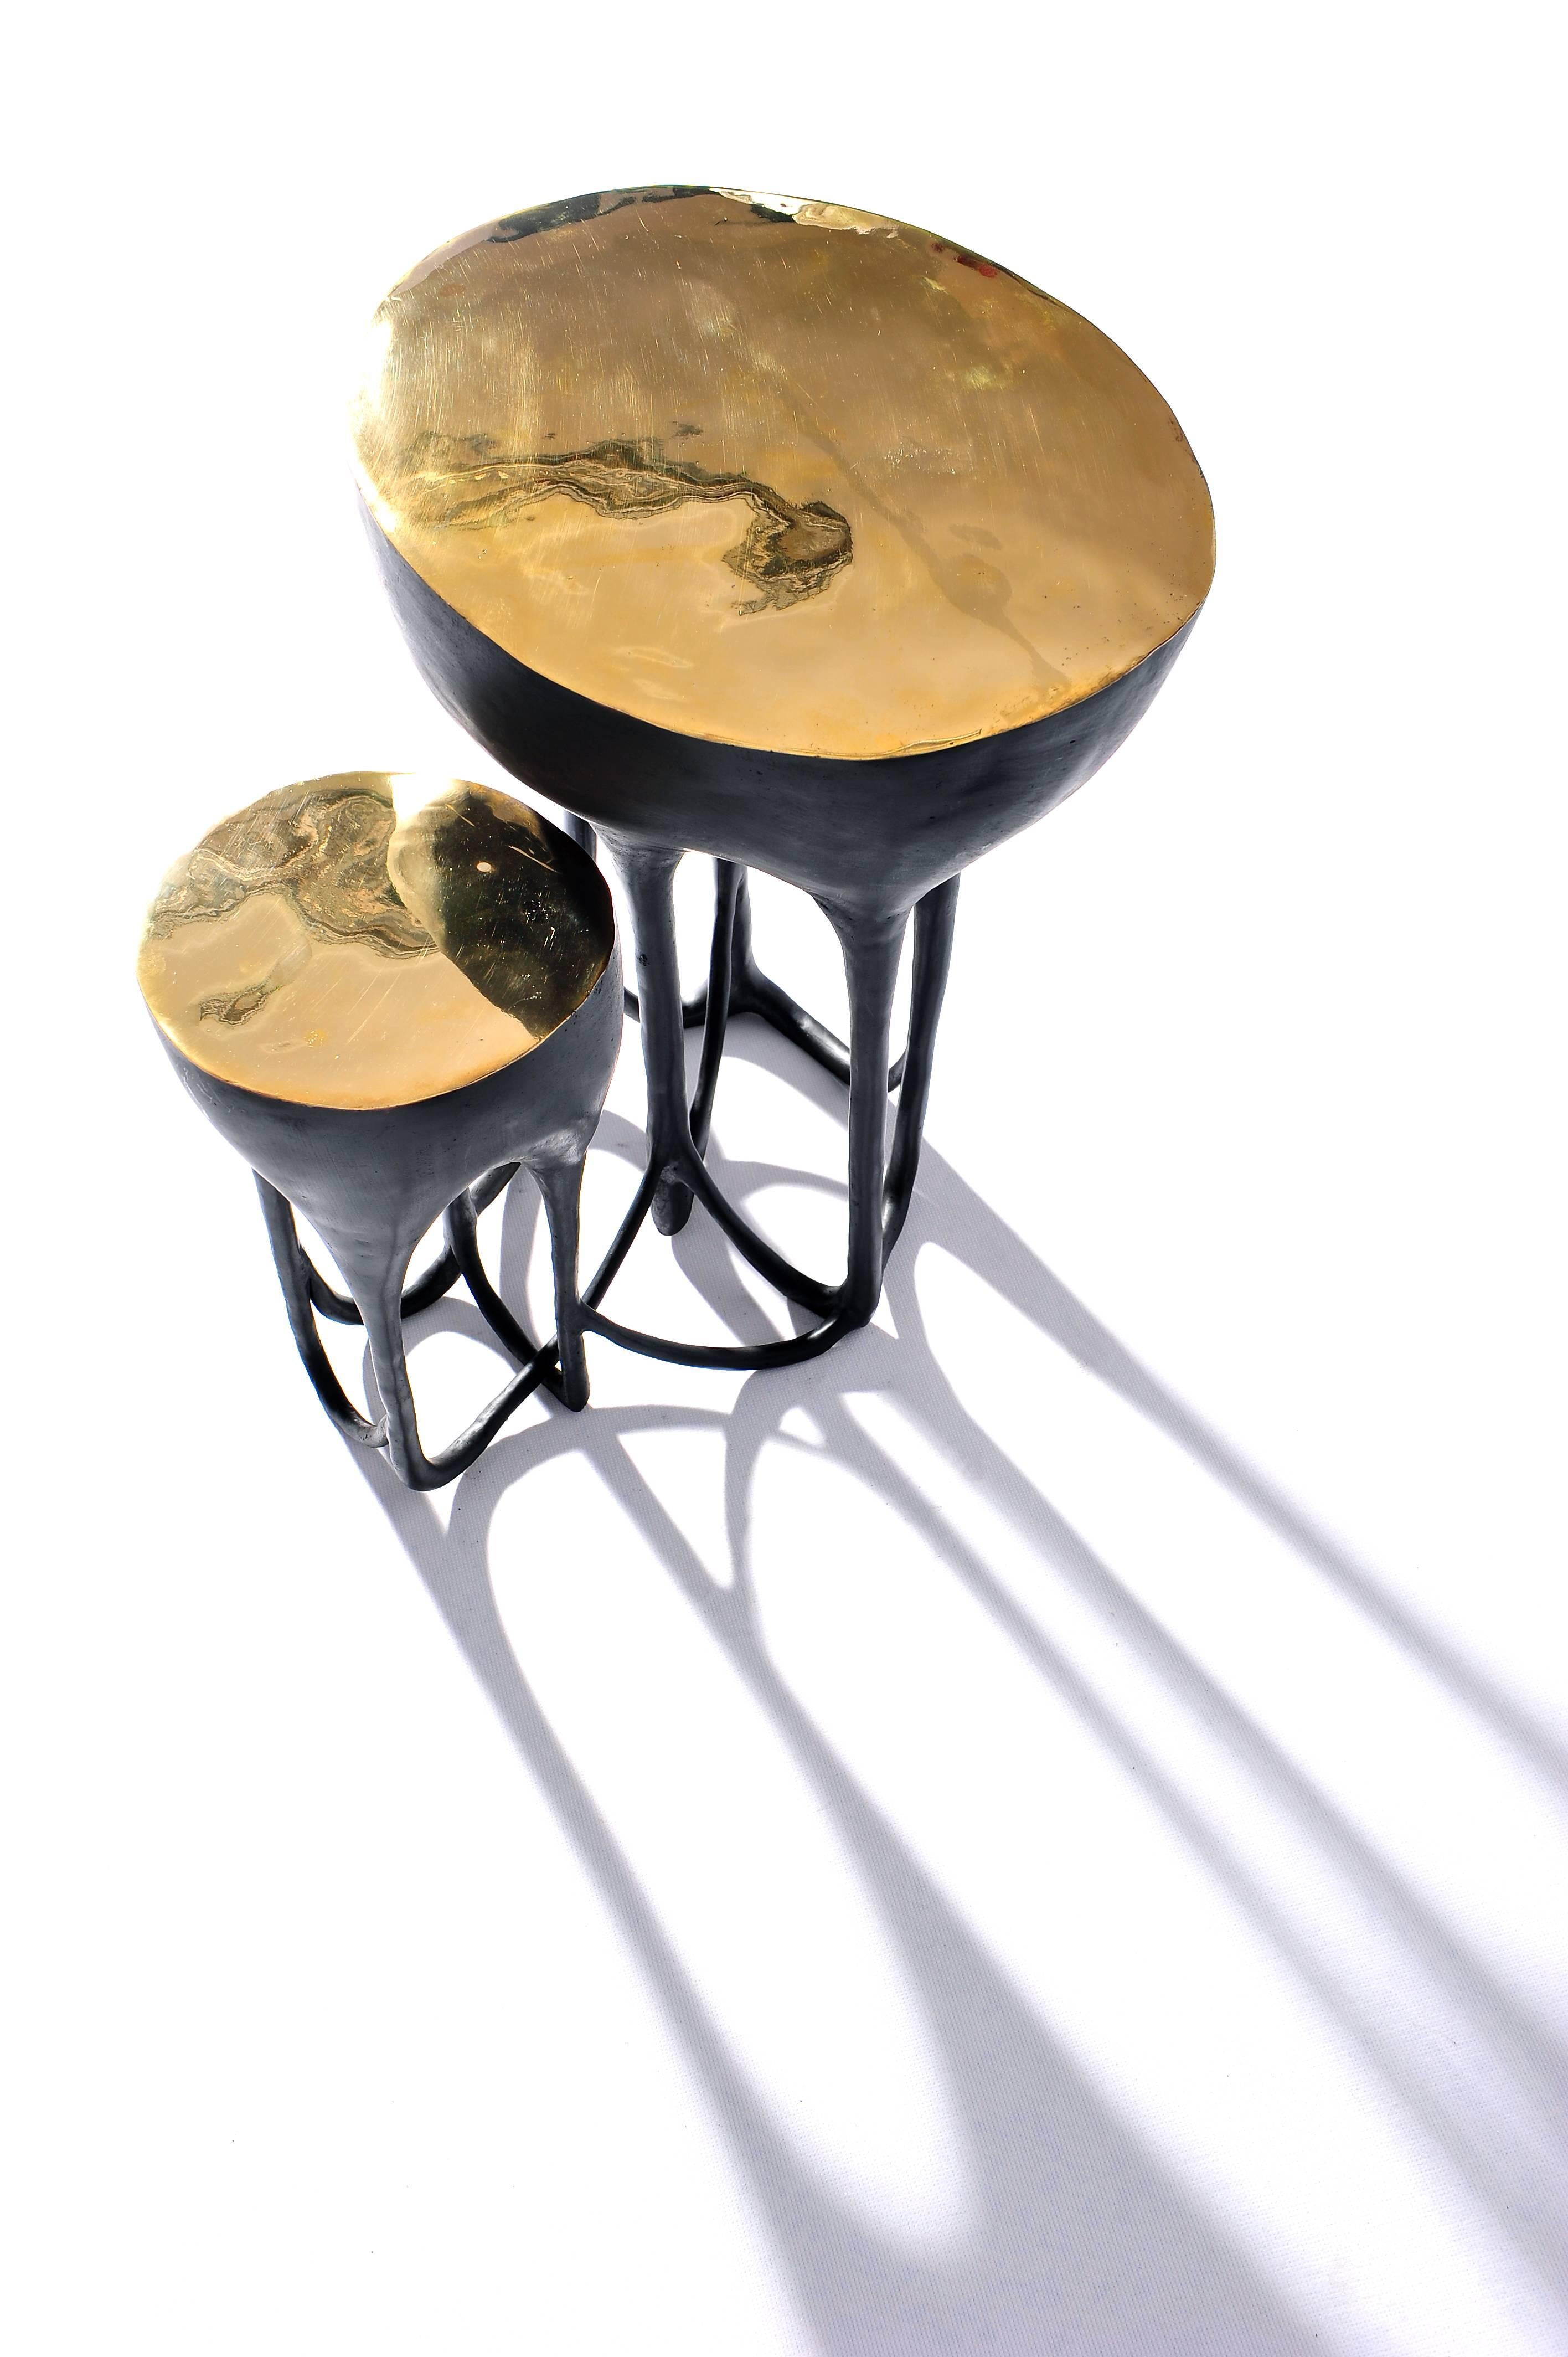 Brass hand-sculpted side table by Masaya.
Brass hand-sculpted side table.
Dimensions: H 50 x W 43 x L 50 cm.
Masaya is our brand's collection which combines stylishly refined designs with the purity of solid wood and marble tops and bronze bases.